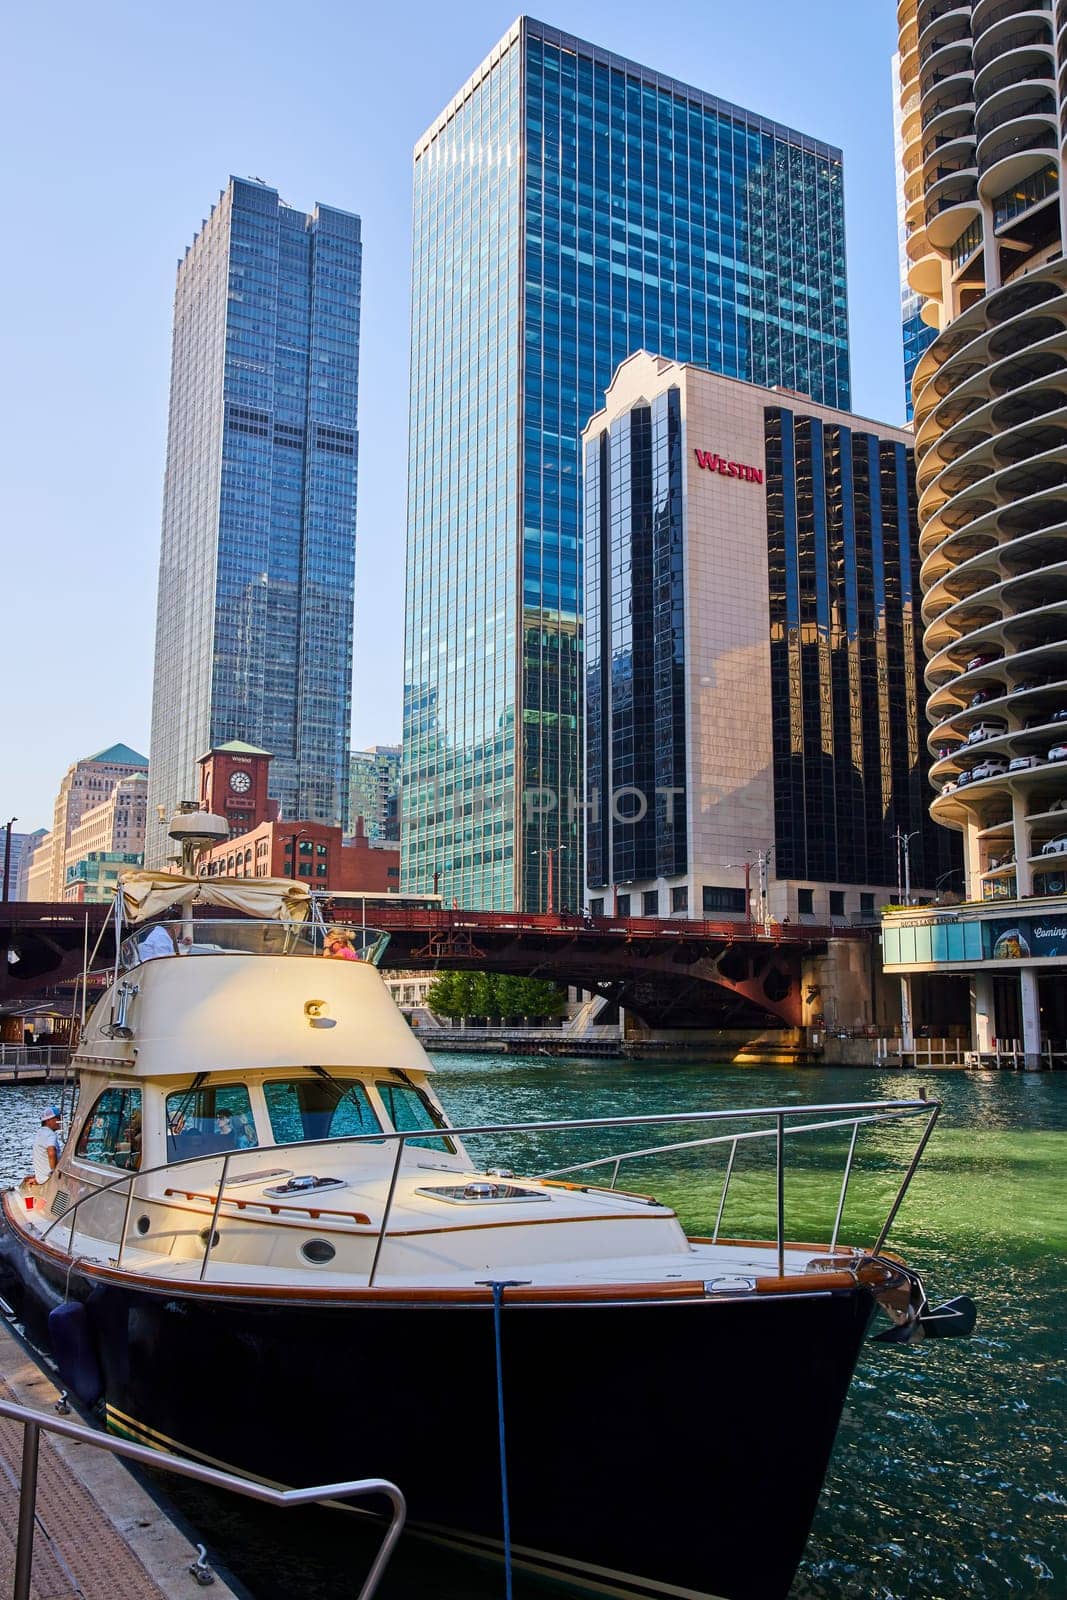 Image of Boat close up with Chicago canal and bridge with skyscraper hotel and offices background, Illinois